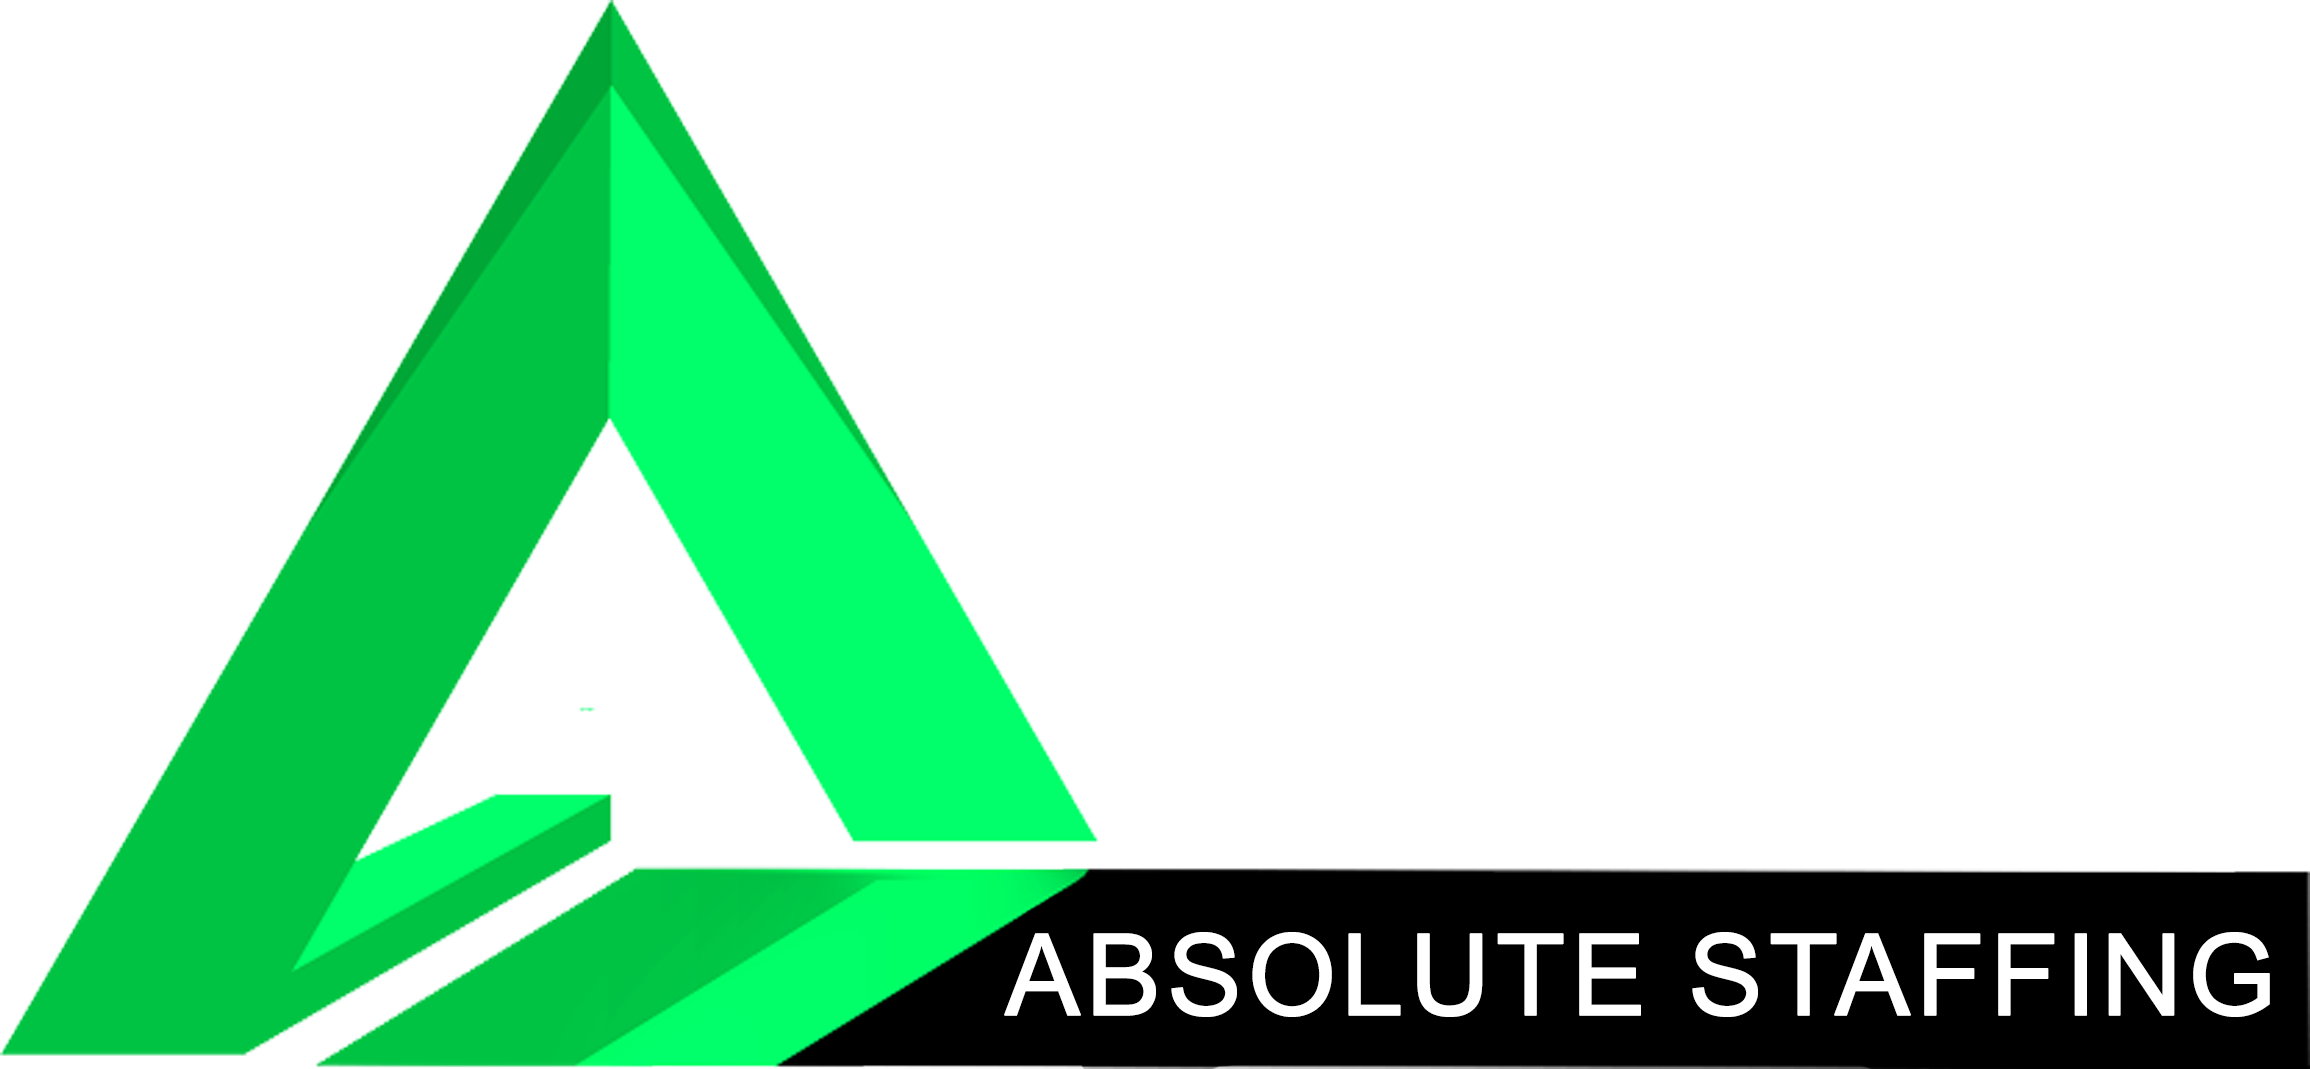 revised_logo_ABSOLUTE STAFFING